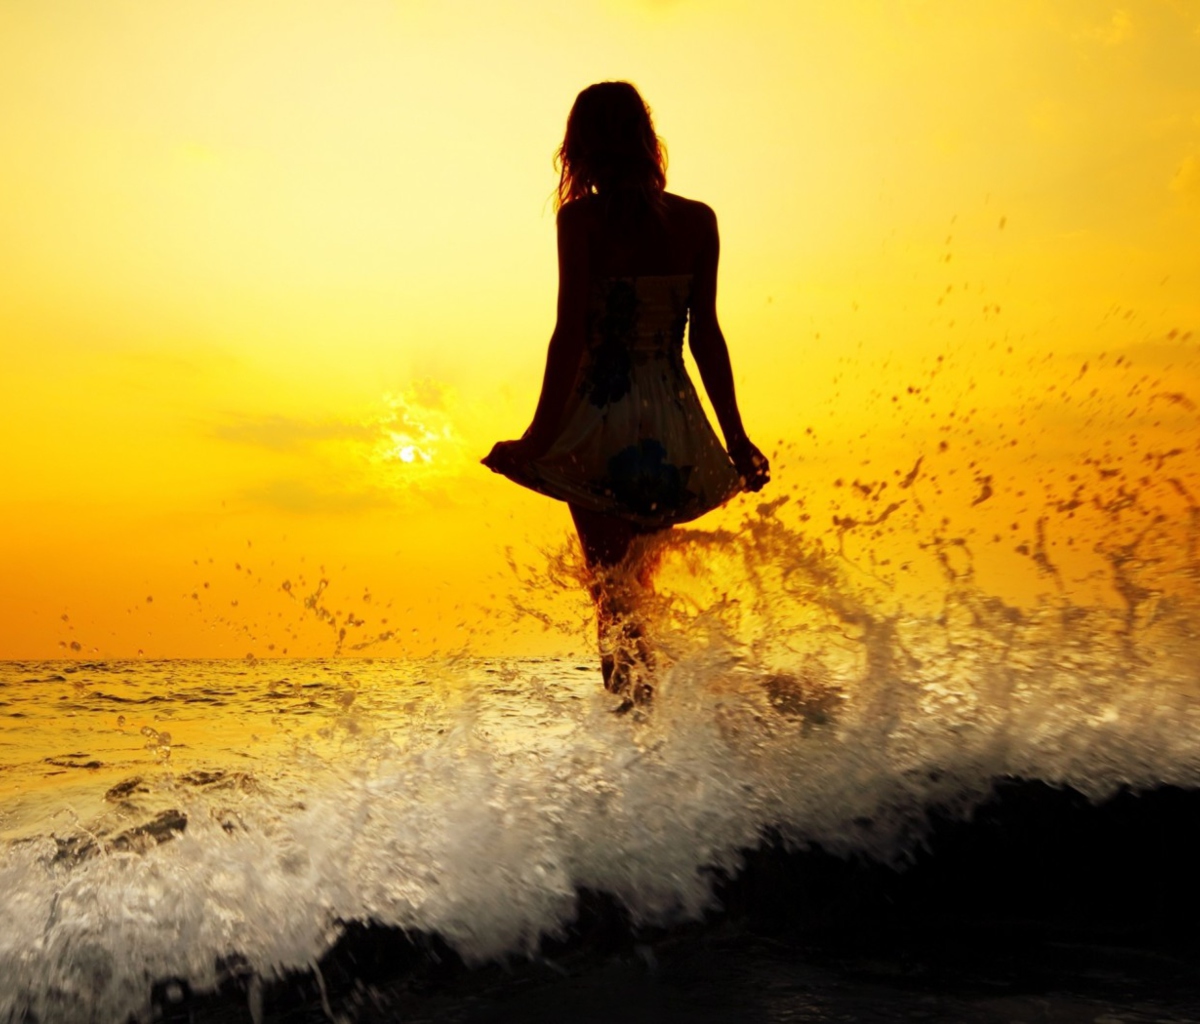 Girl Silhouette In Sea Waves At Sunset wallpaper 1200x1024